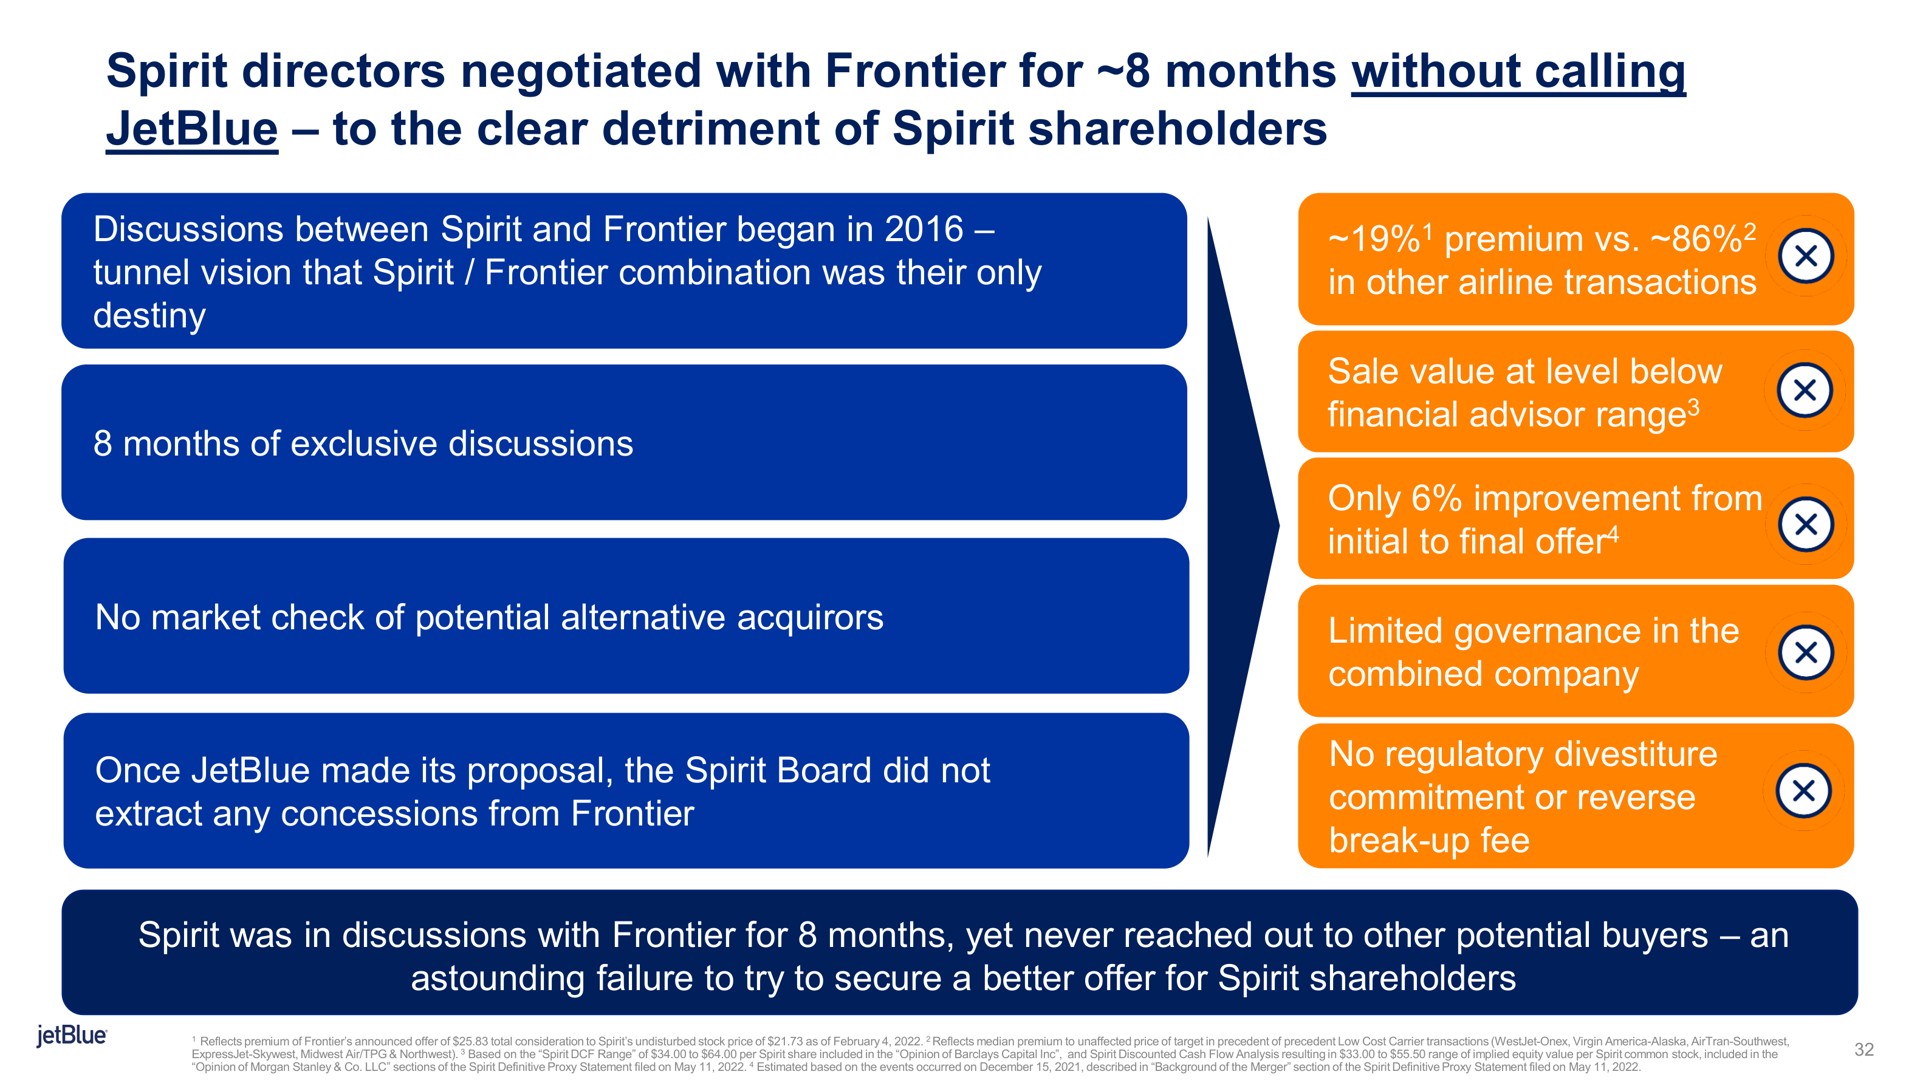 spirit directors negotiated with frontier for months without calling to the clear detriment of spirit shareholders | jetBlue